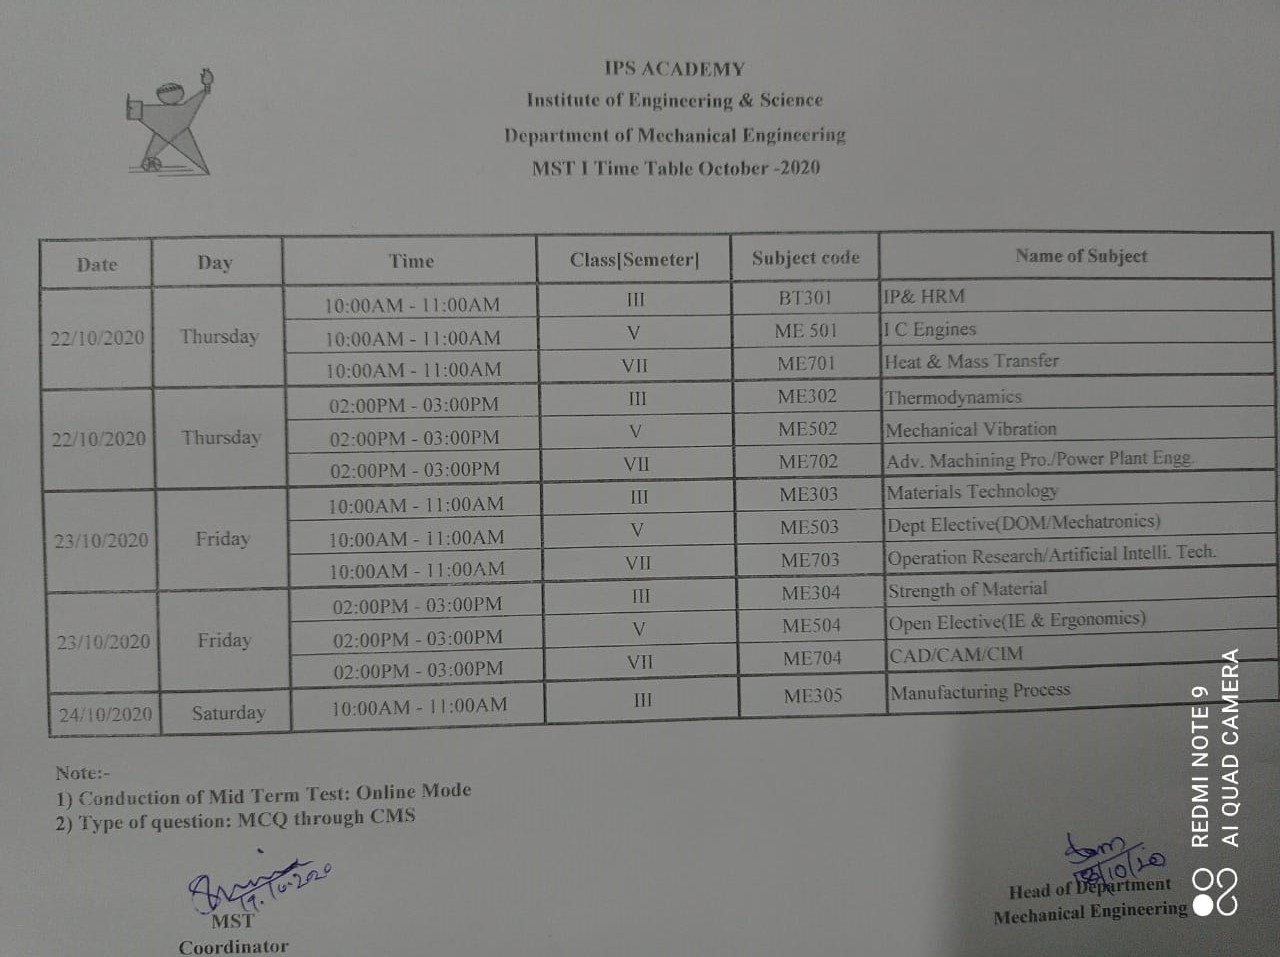 mst-1time-table-october-2020